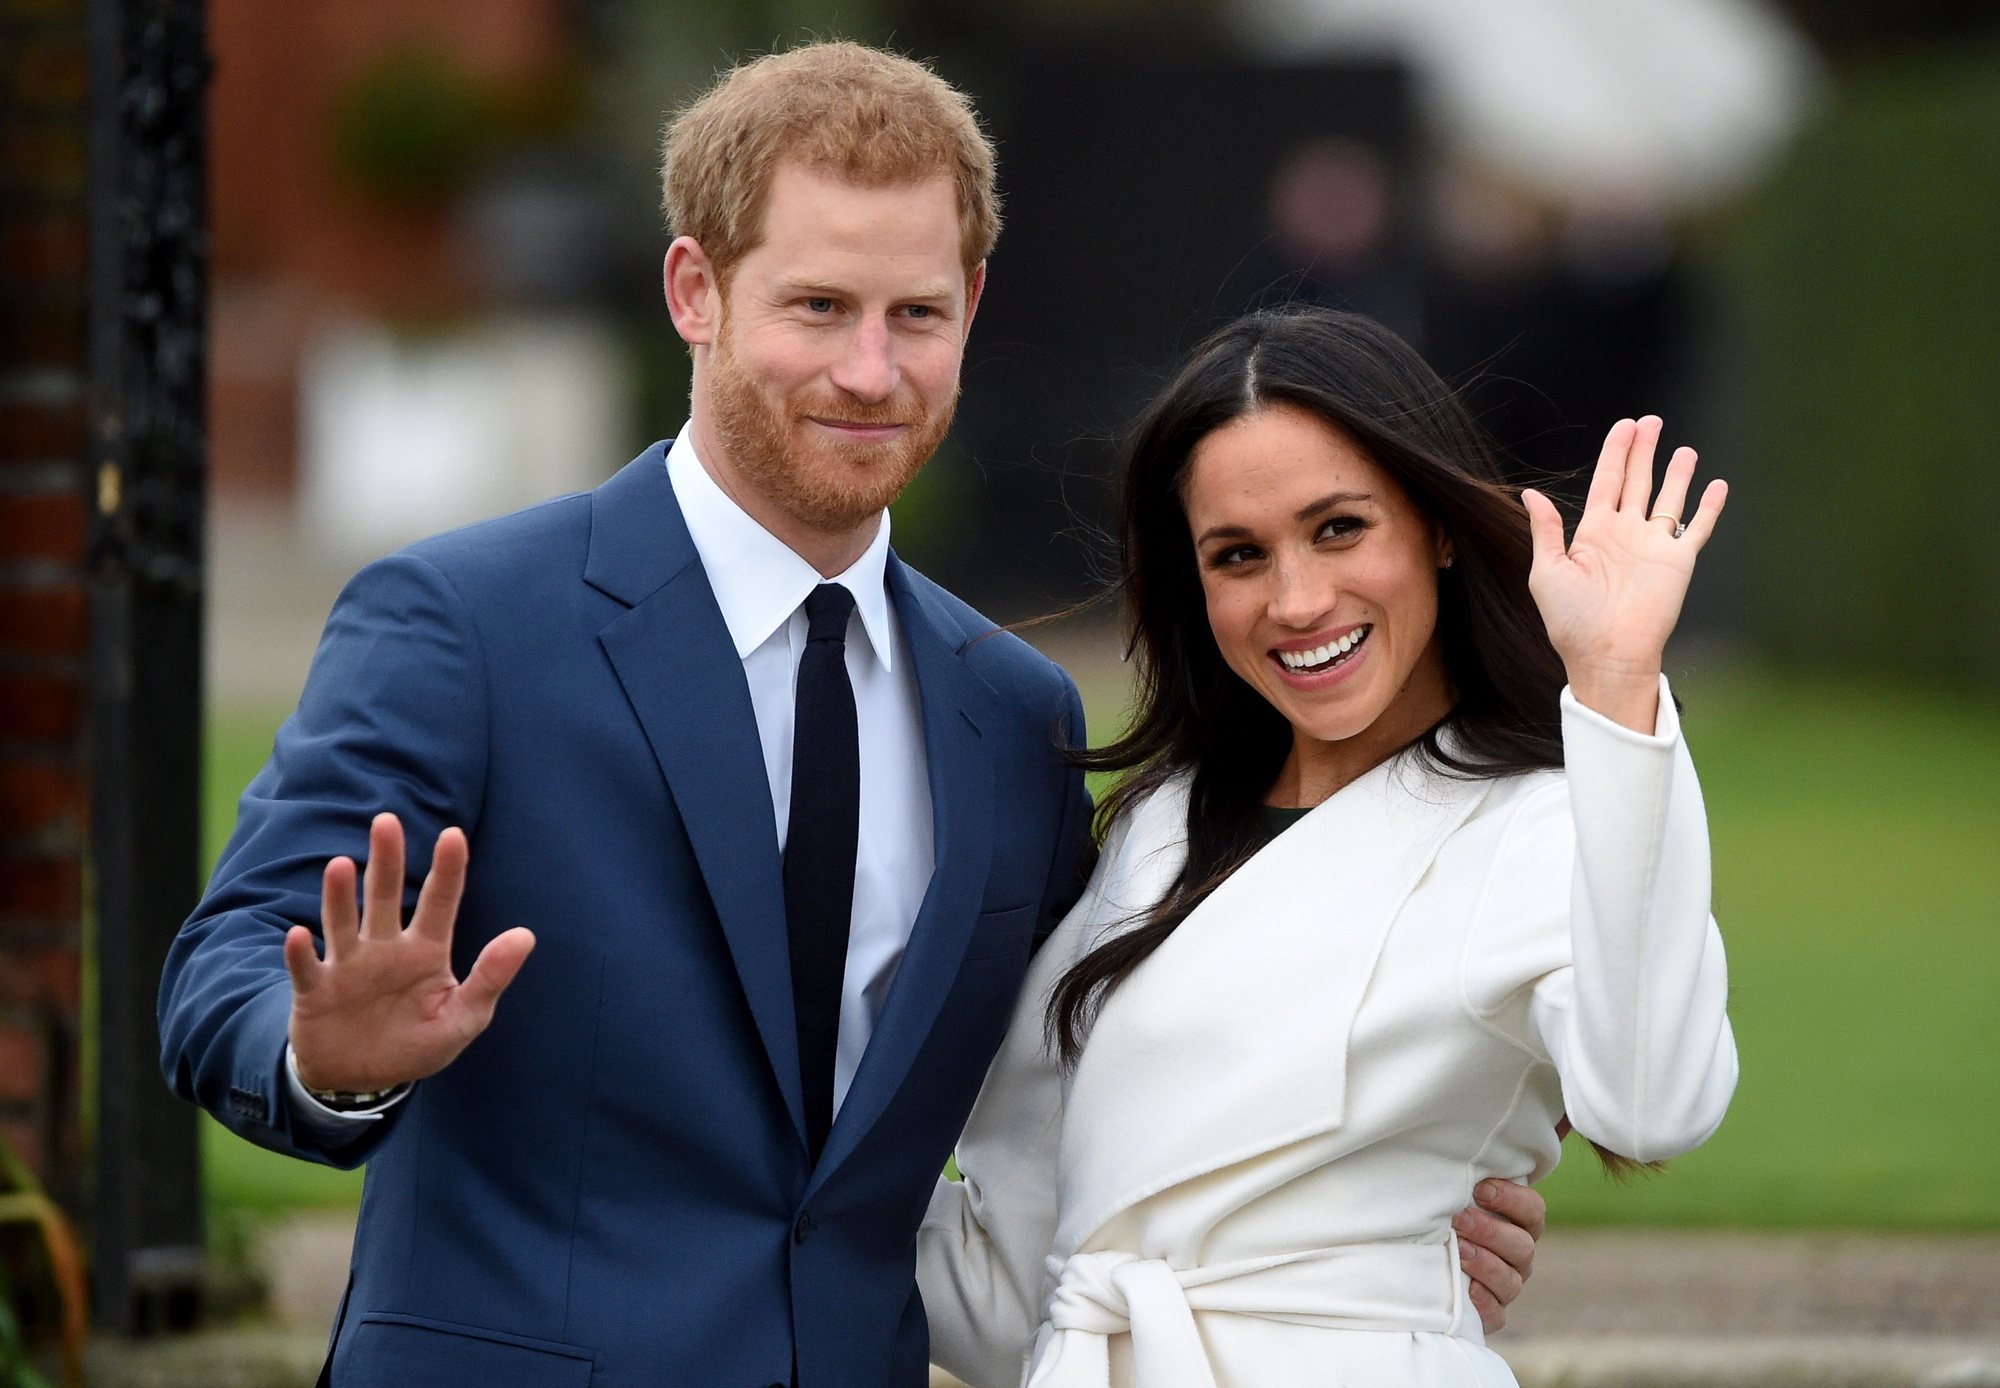 epa09023604 (FILE) - Britain&#039;s Prince Harry pose with Meghan Markle during a photocall after announcing their engagement in the Sunken Garden in Kensington Palace in London, Britain, 27 November 2017 (reissued 19 February 2021). Buckingham Palace announced on 19 February that Harry and Meghan have confirmed to Queen Elizabeth II that they will not be returning as working members of the Royal Family.  EPA/FACUNDO ARRIZABALAGA *** Local Caption *** 56689949